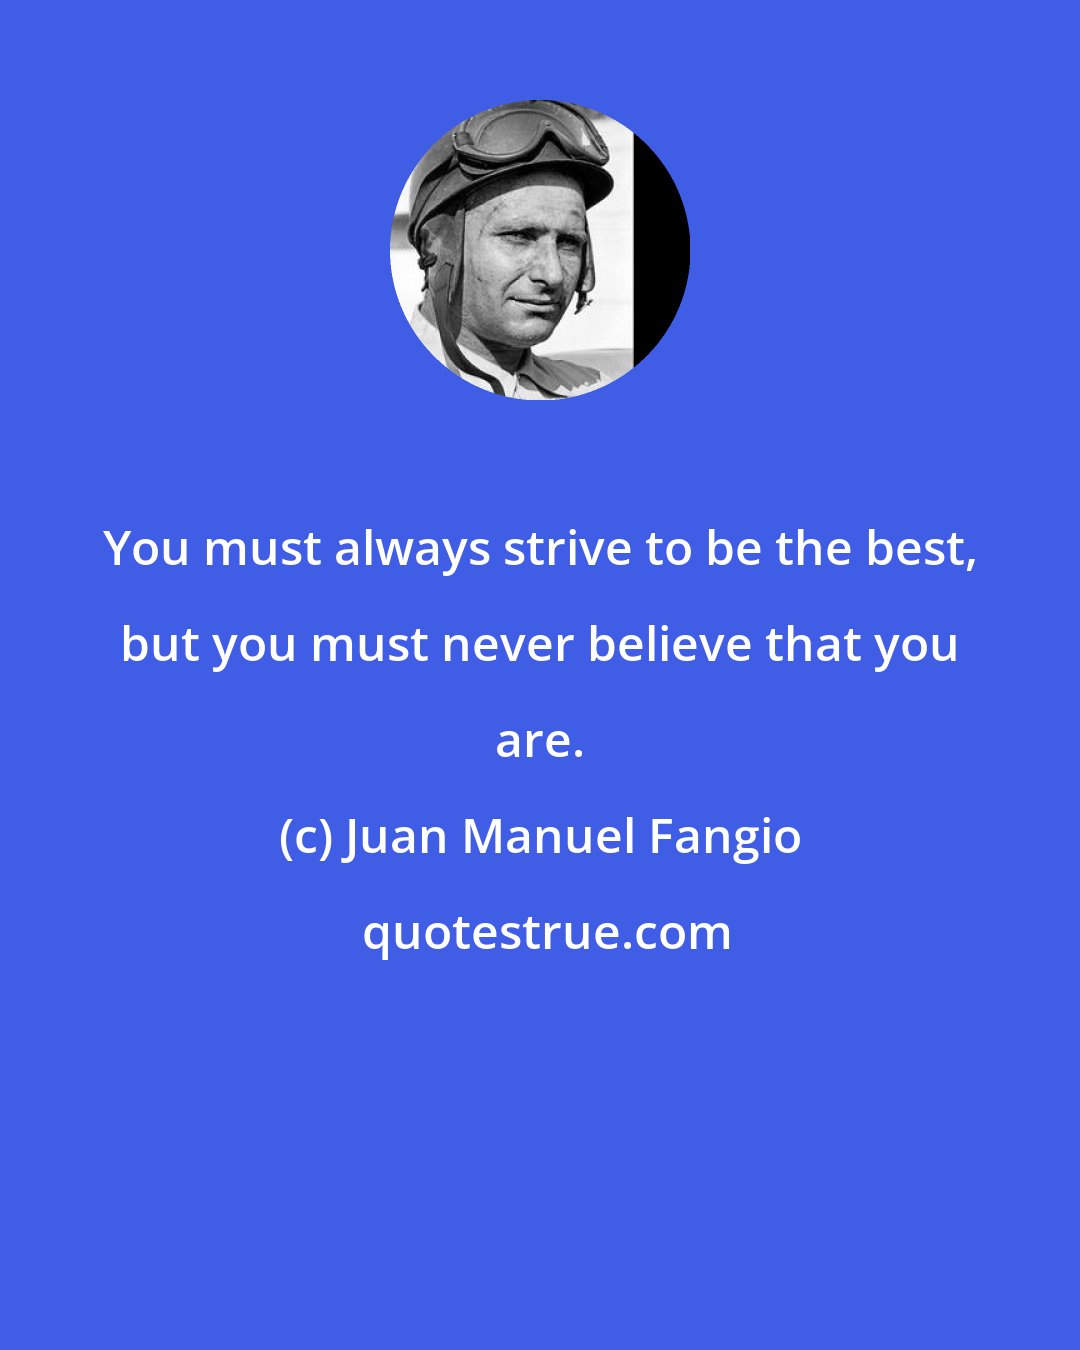 Juan Manuel Fangio: You must always strive to be the best, but you must never believe that you are.